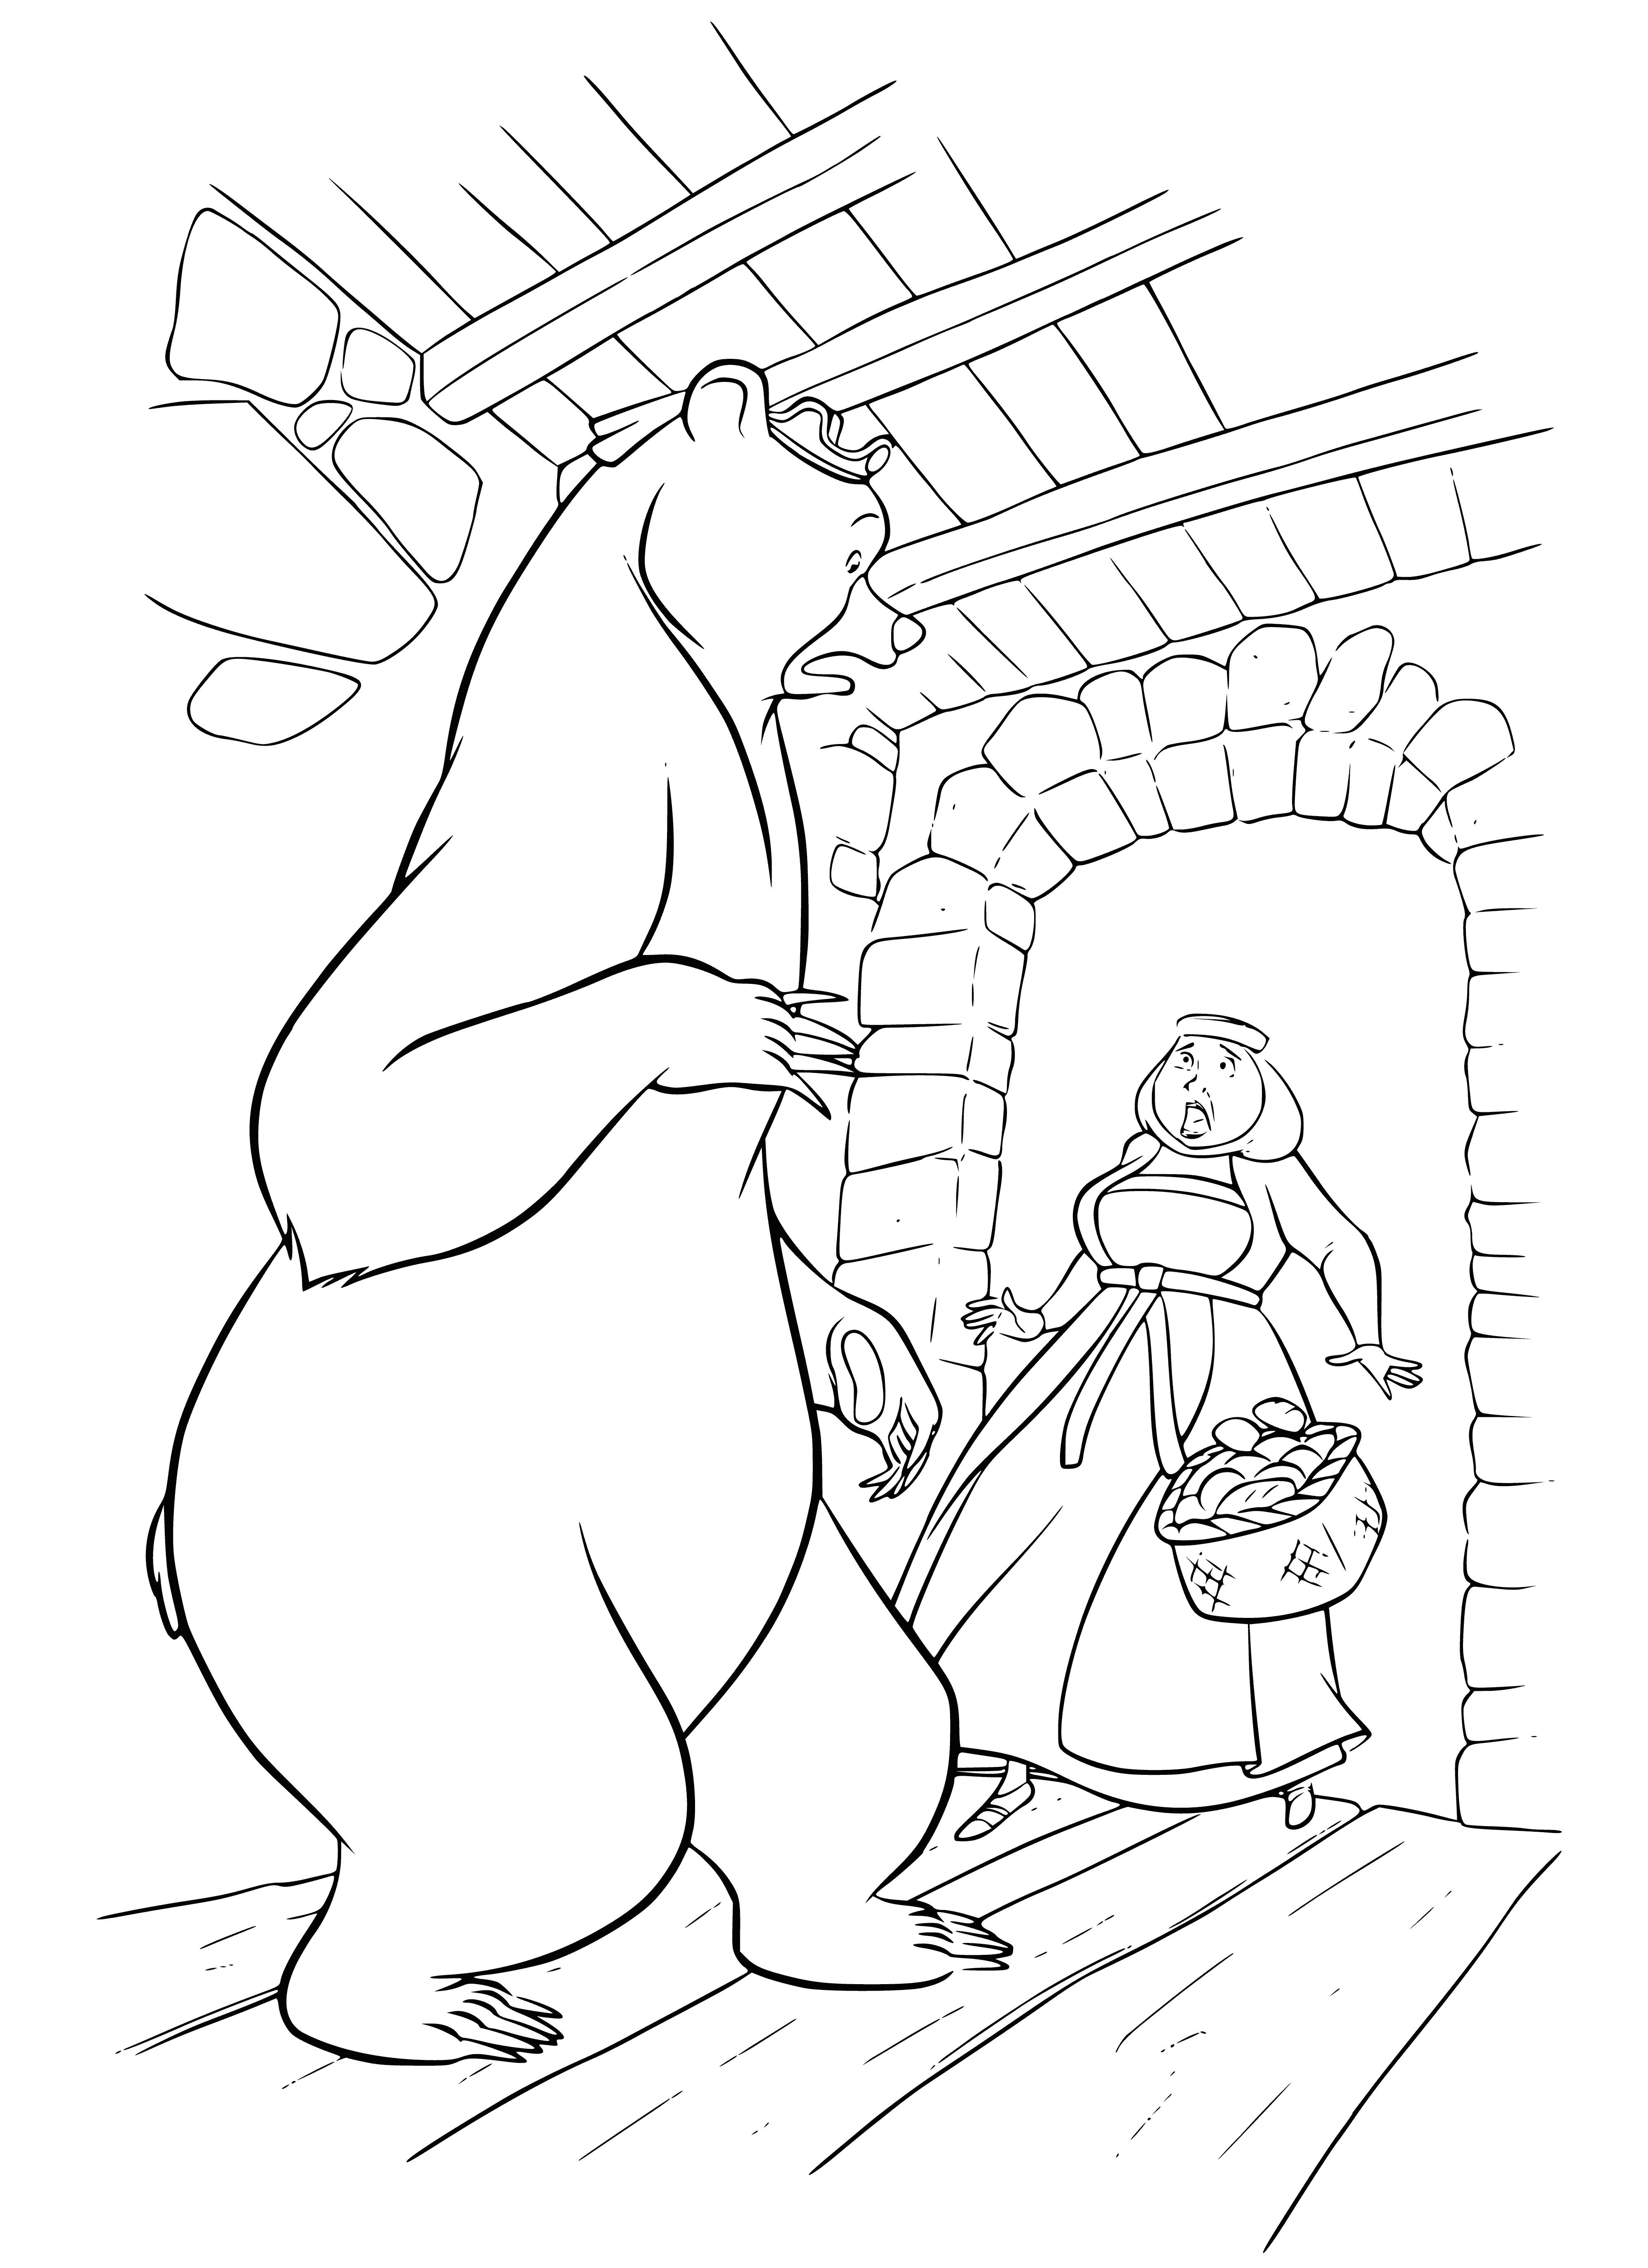 The queen turned into a bear coloring page